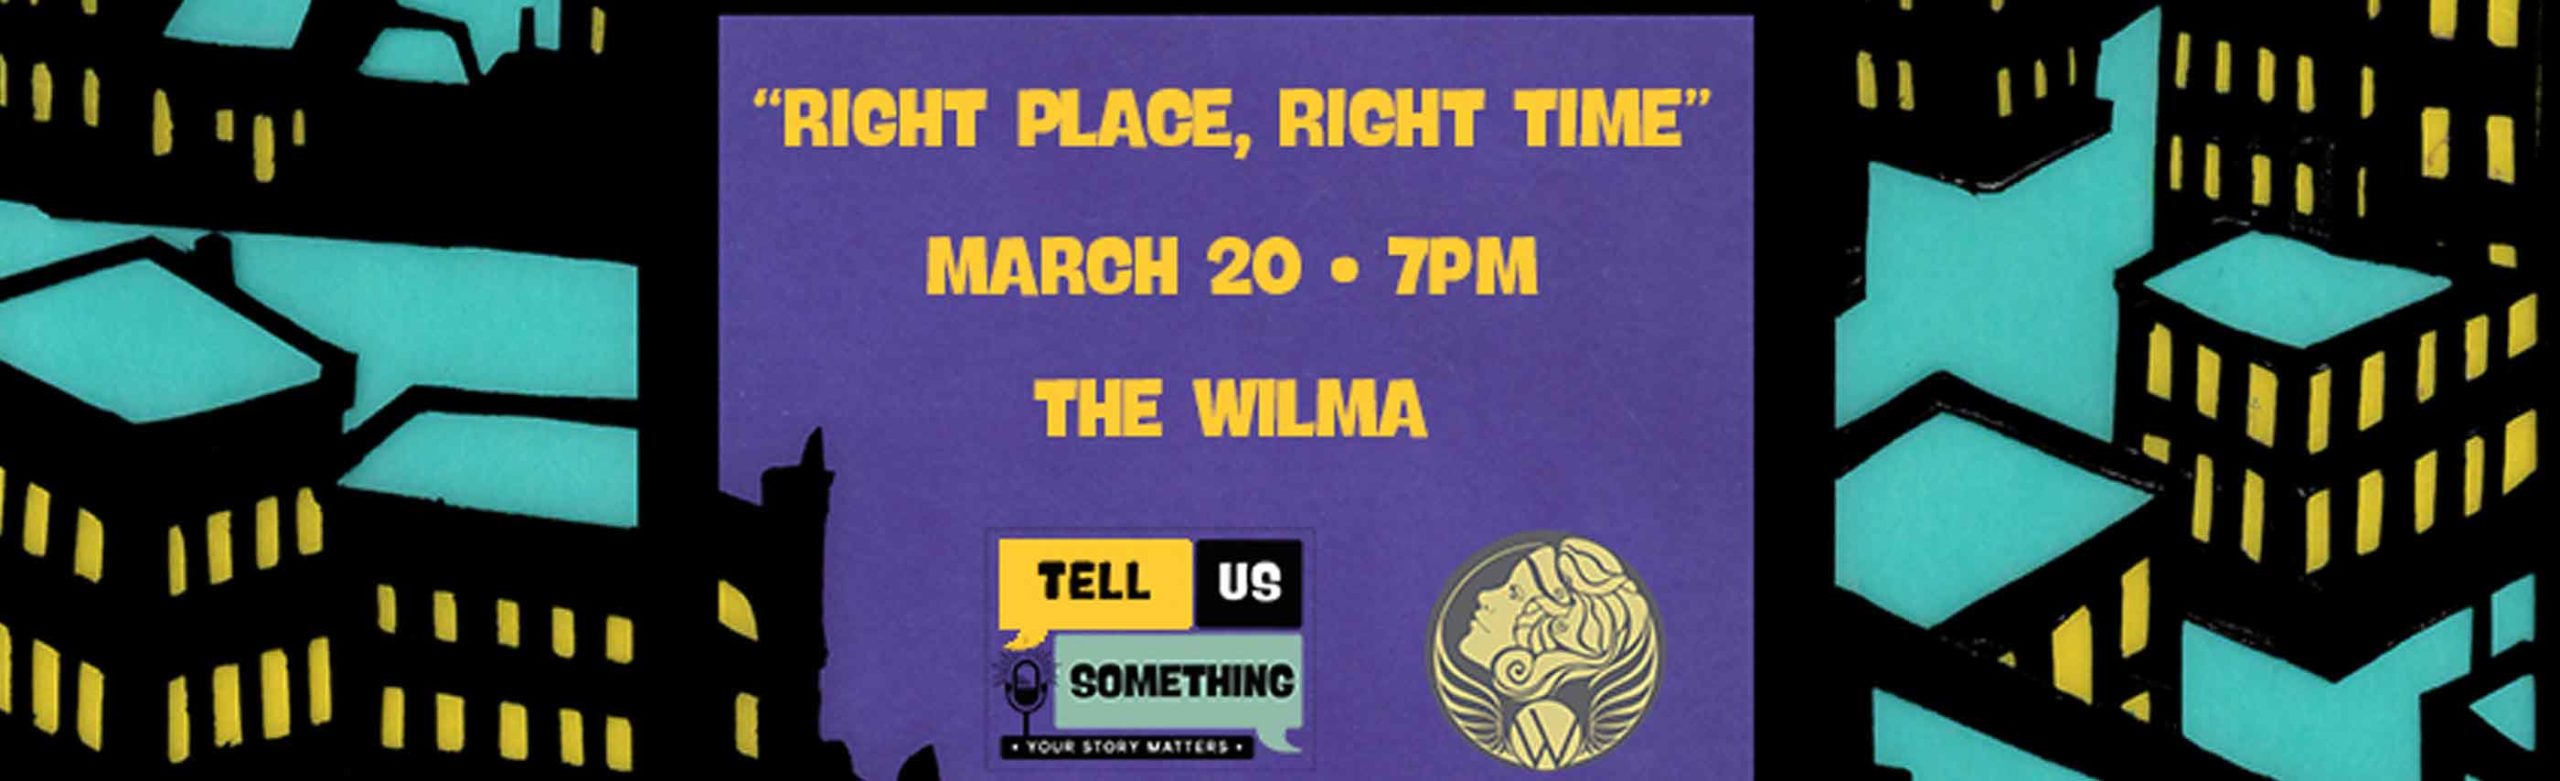 Event Info: Tell Us Something at The Wilma Image